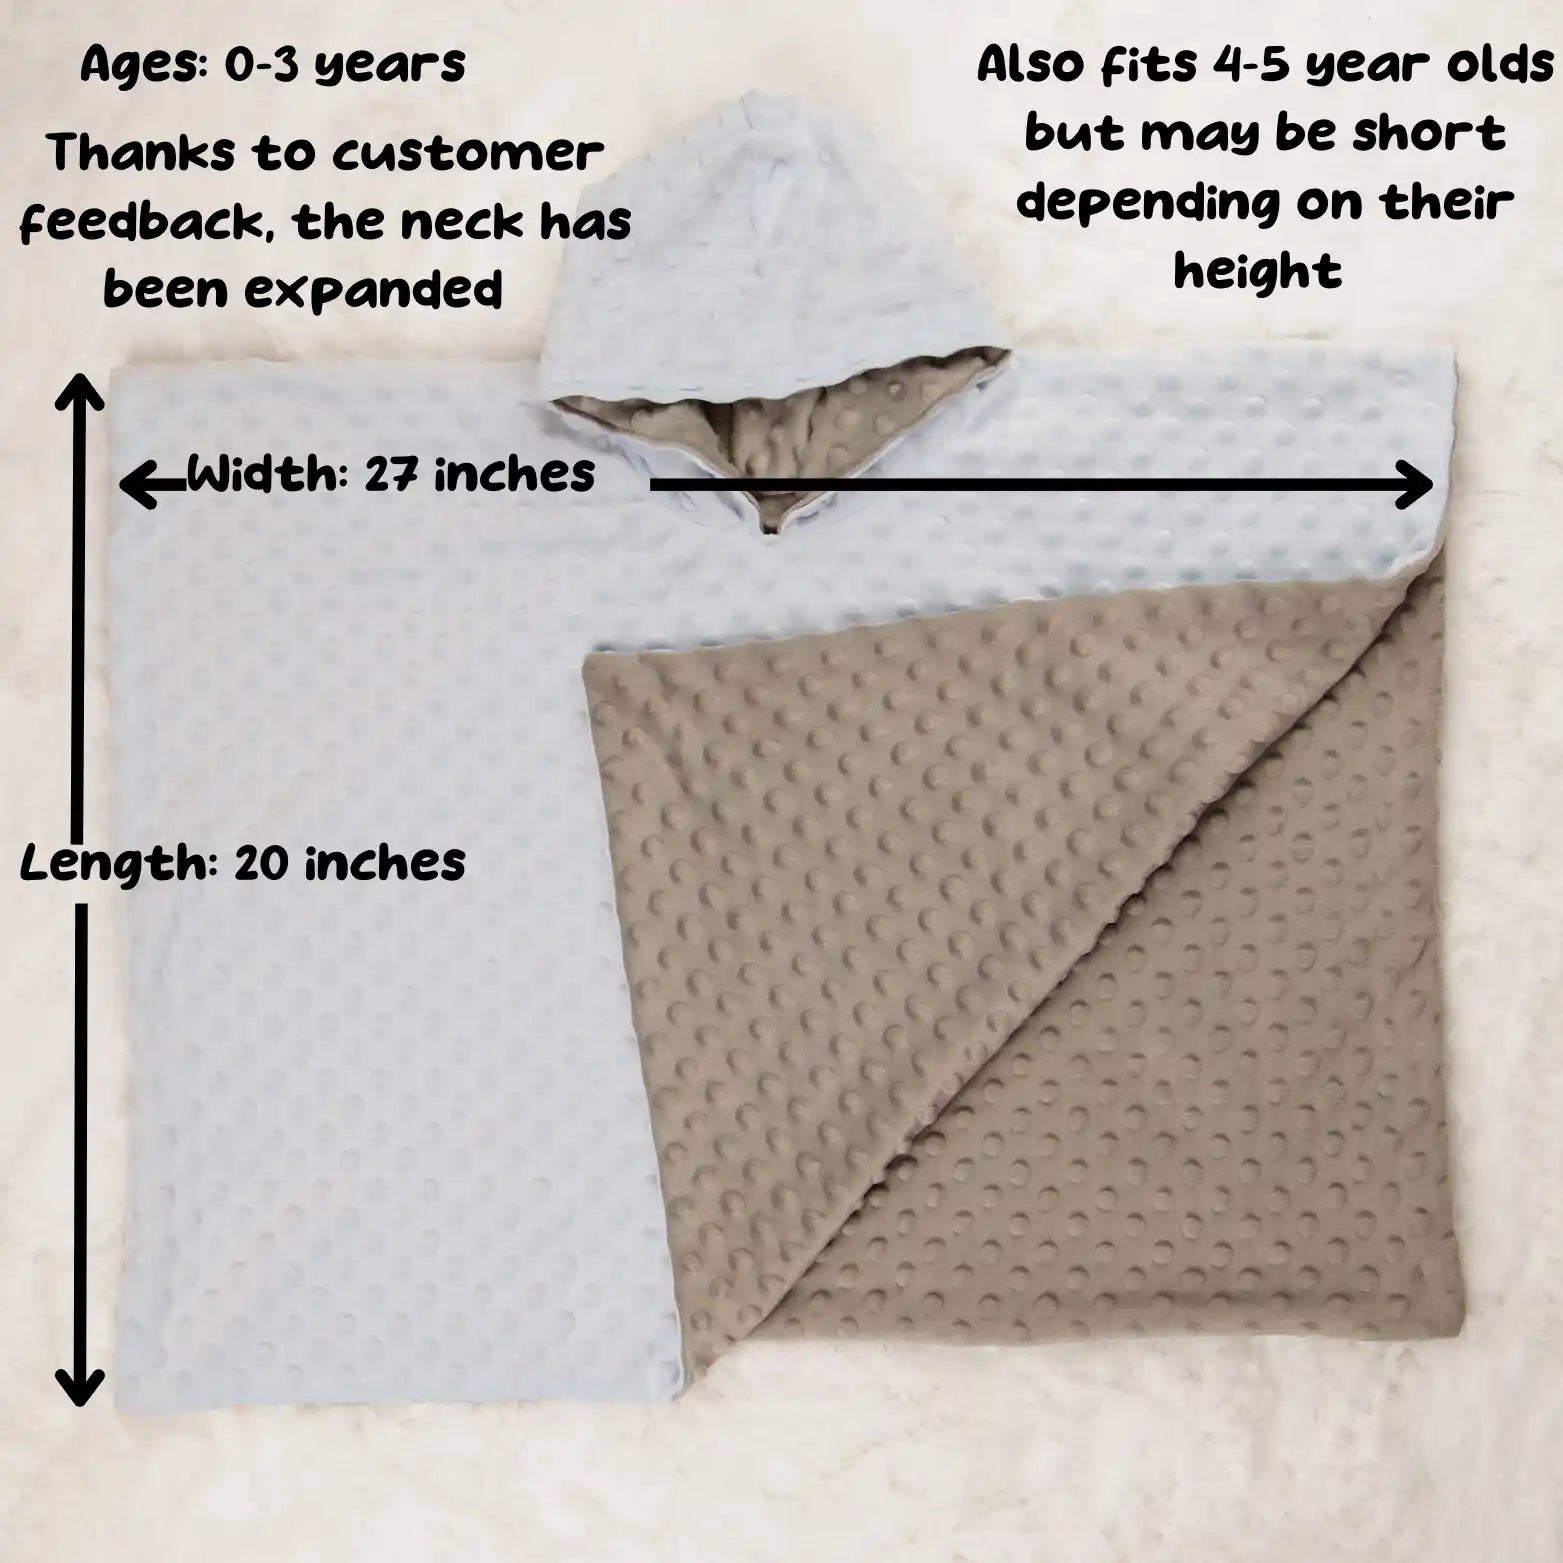 car seat poncho measurements blue: ages: 0-3 years, width 27 inches, length 20 inches